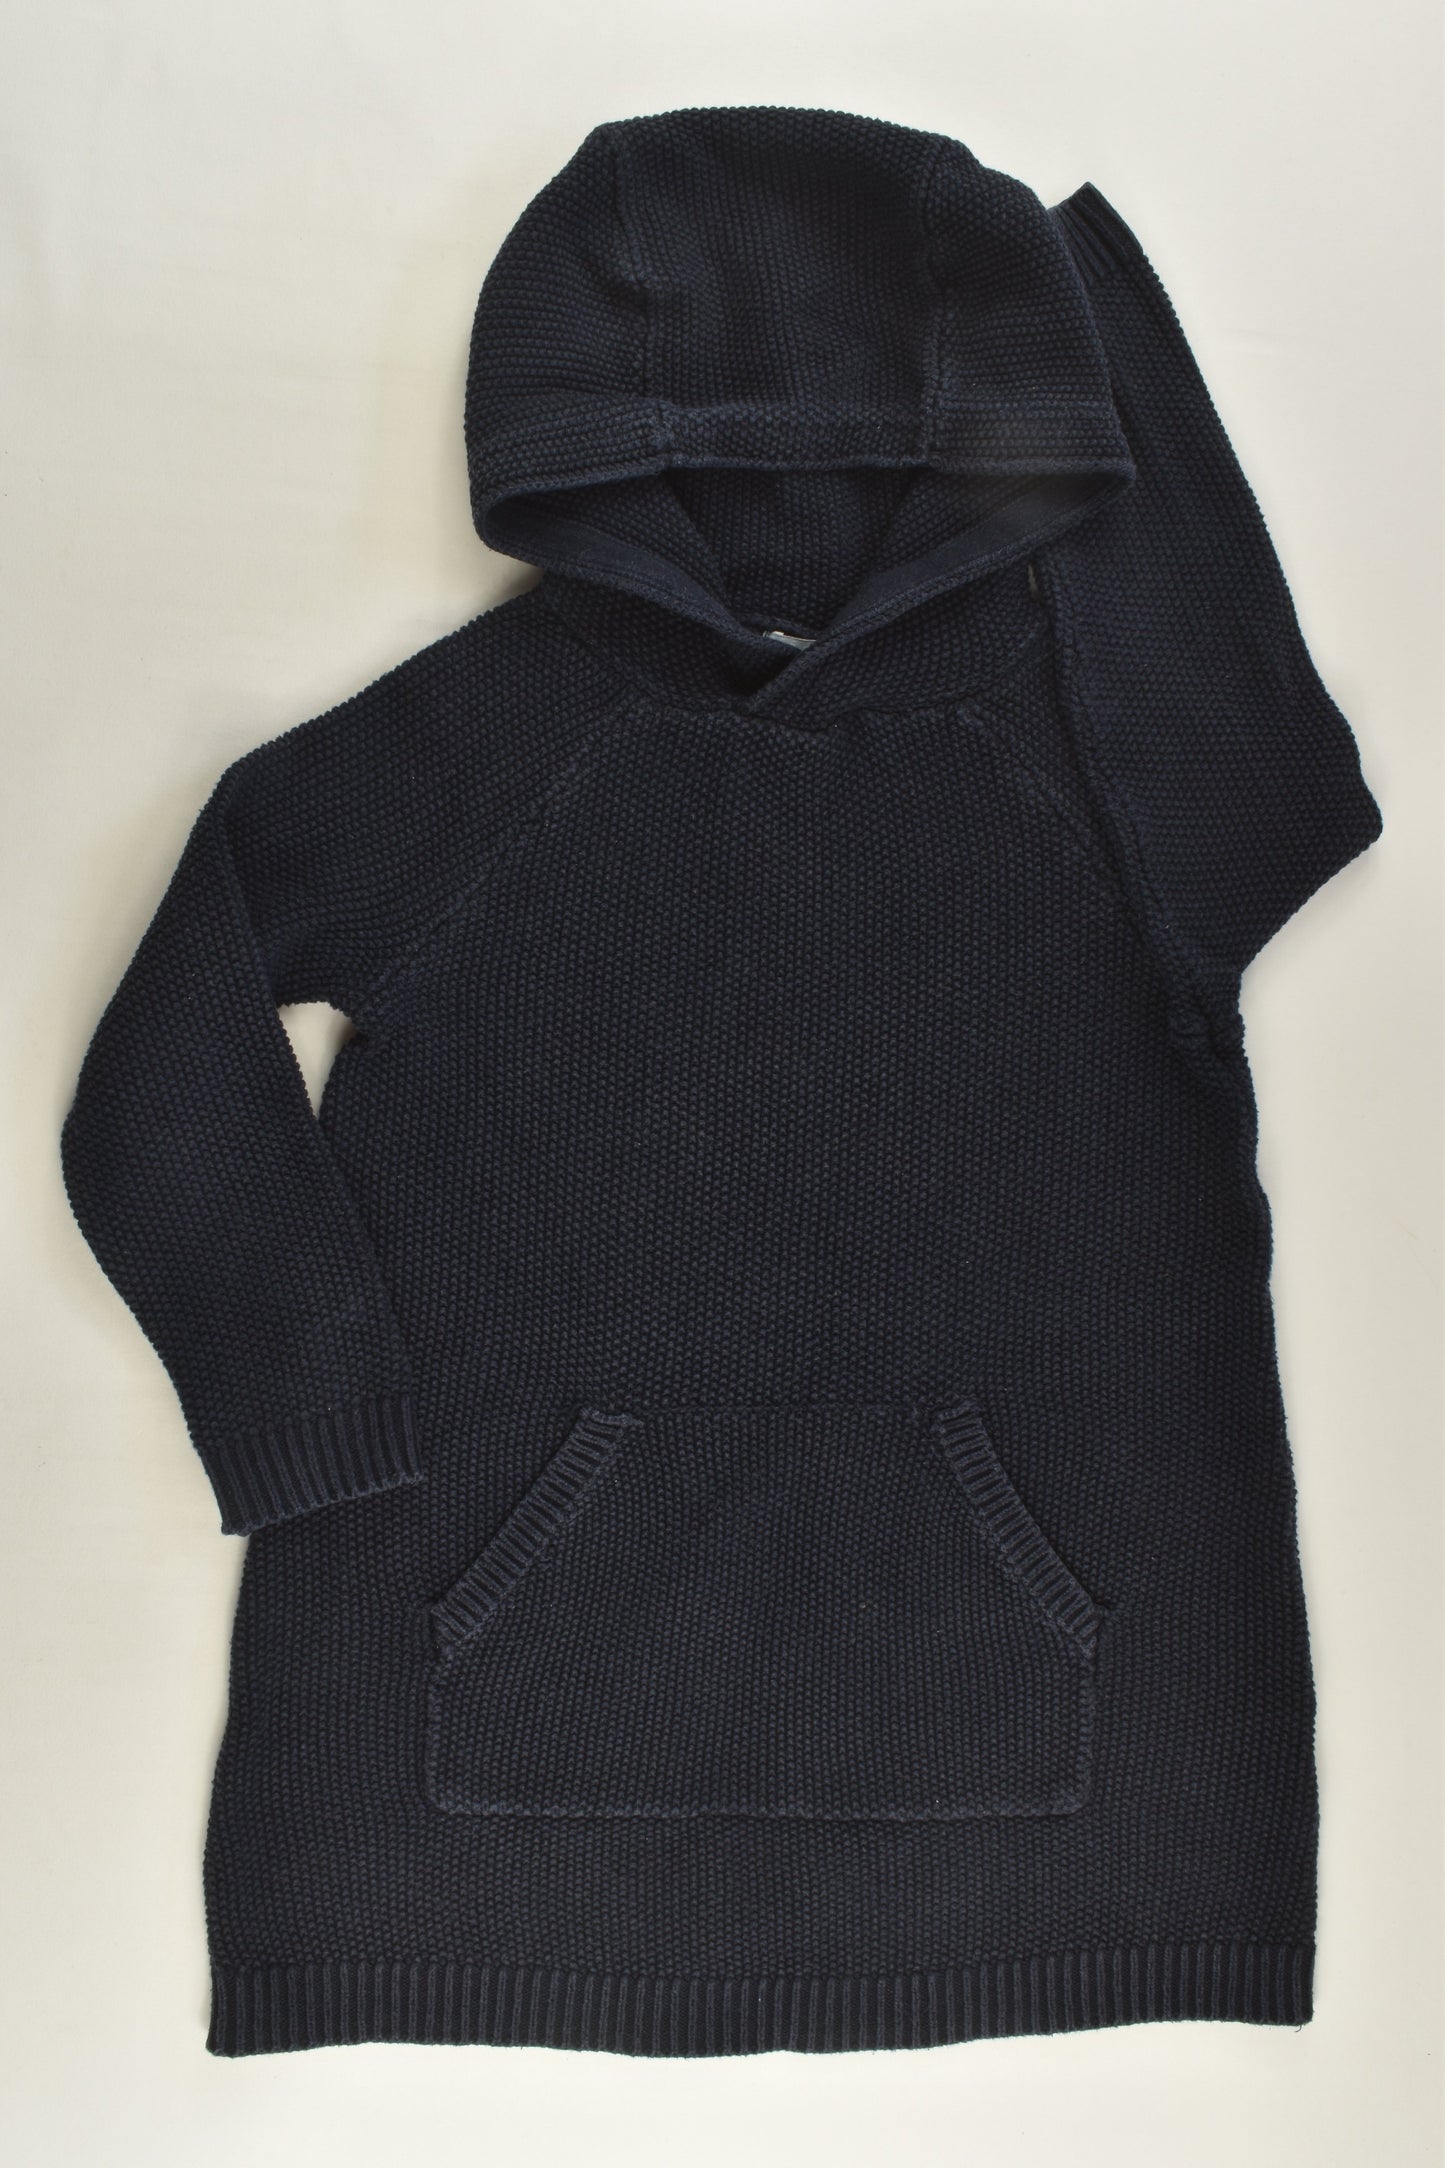 COS Size 1-2 (86/92 cm) Knitted Hooded Tunic